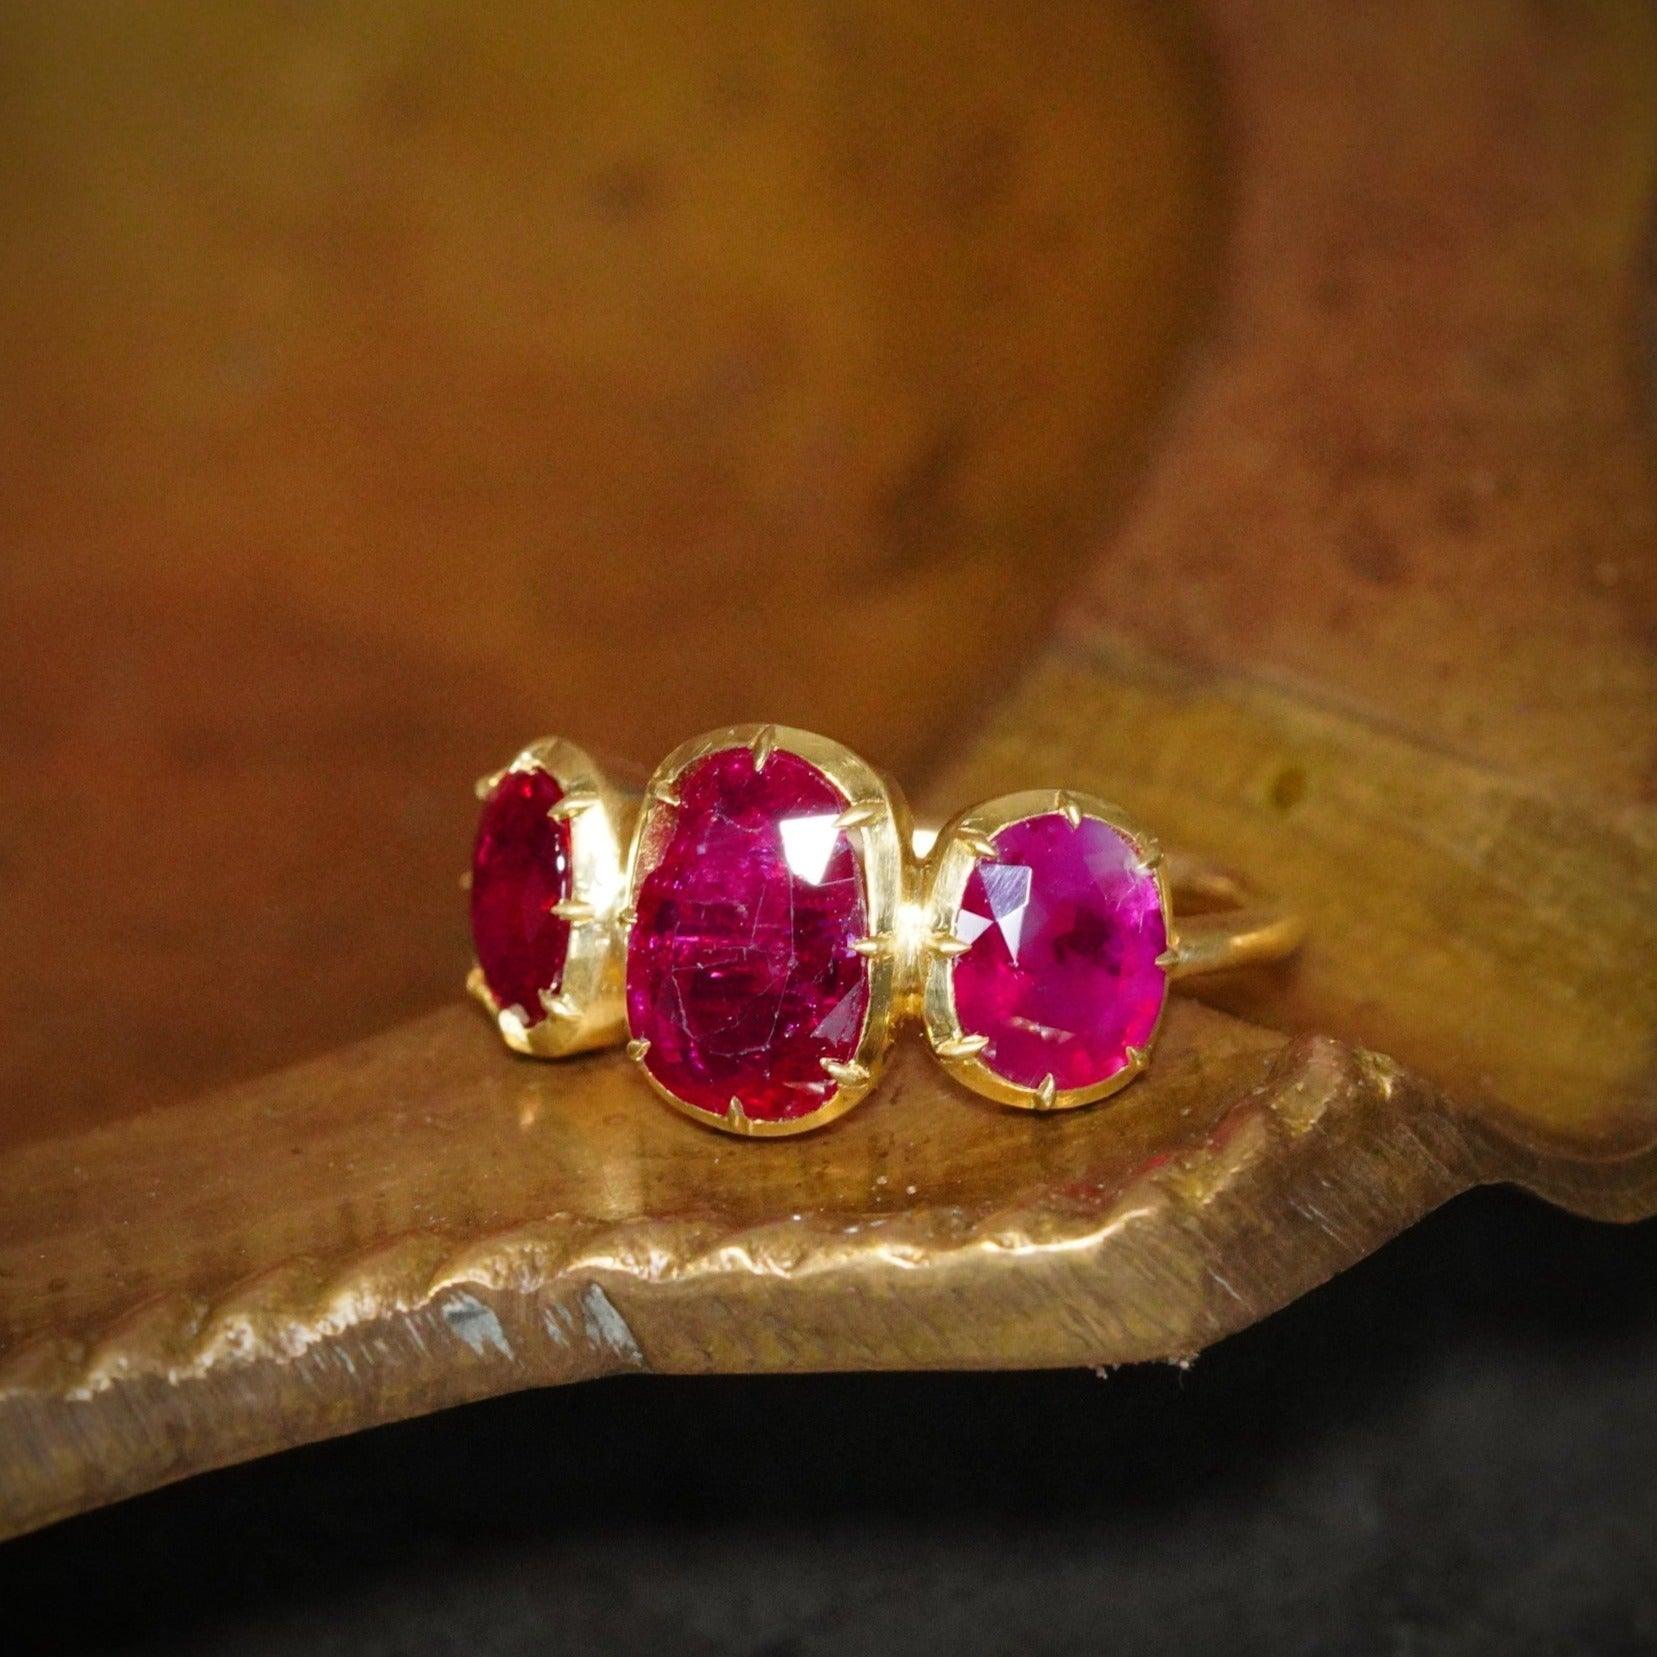 Jogani collection: Exquisite Burma ruby collet ring in a romantic Victorian-style design